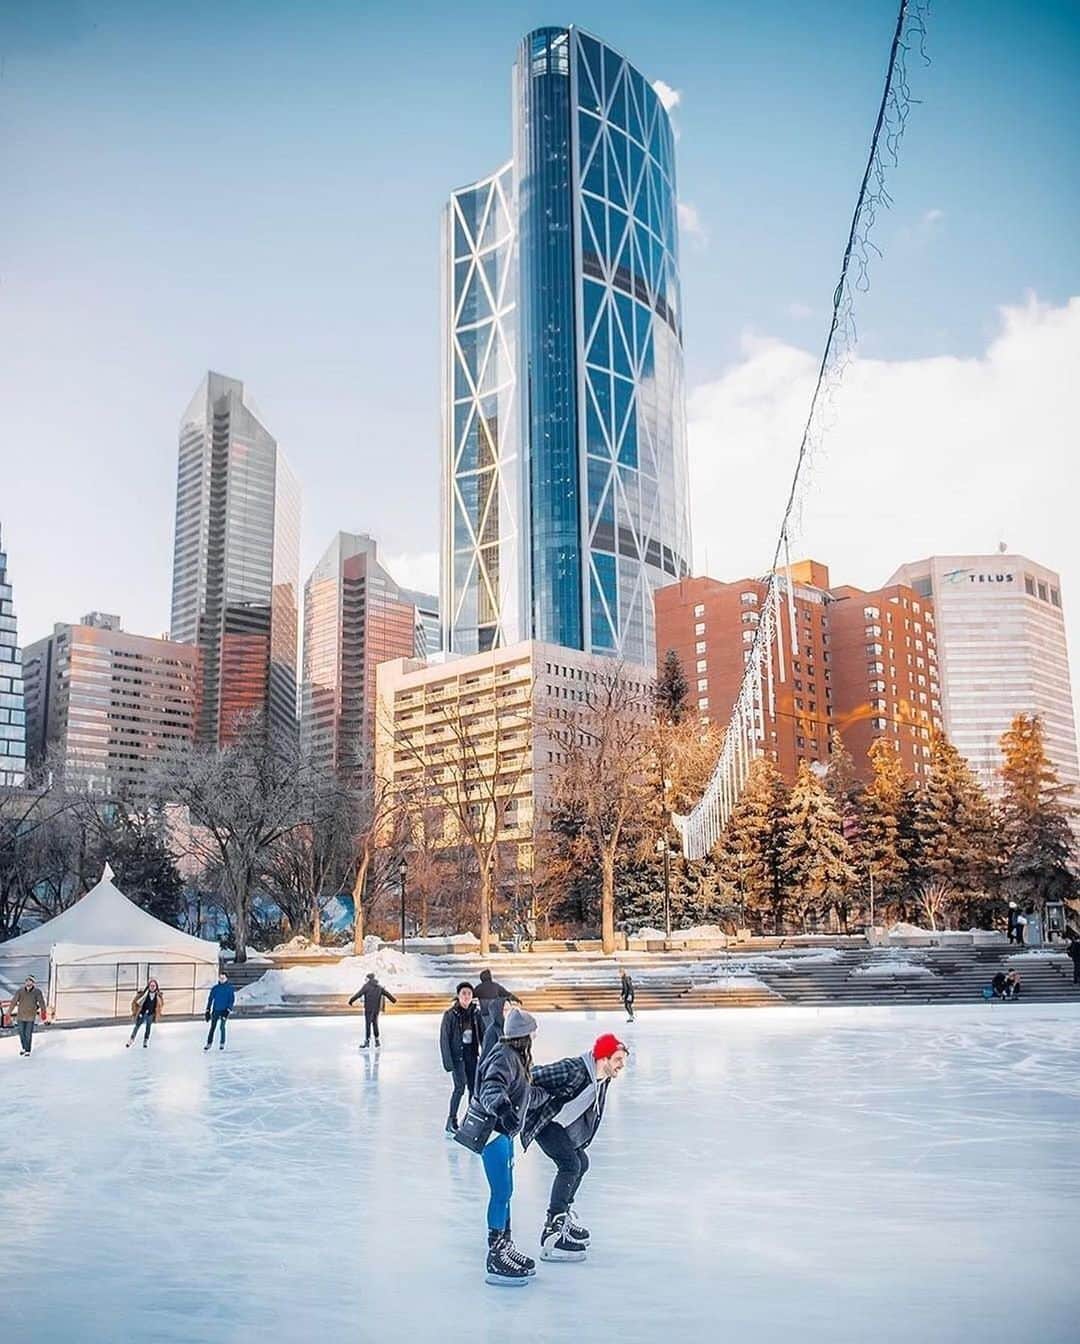 Explore Canadaさんのインスタグラム写真 - (Explore CanadaInstagram)「Today’s #CanadaSpotlight is on unique winter experiences in Canada! ⁠⠀⁠⠀ ⁠⠀⁠⠀ This Canada Spotlight is part two of a series of three on Canada’s unique winter experiences. Let us know which one you’d like to do more in the comments and we’ll make sure to do an in depth Canada Spotlight on that experience!⁠⠀⁠⠀ ⁠⠀ ⛸️ No matter where you find yourself in Canada you can probably find an area to ice skate close by. One of the best aspects of ice skating in Canada is that the rinks or trails are often as varied and diverse as Canada’s geography. Whether it’s skating the over 10km (6.2mi) Red River Mutual trail in Winnipeg or the charming Olympic Plaza in Downtown Calgary you’re bound to experience unique sights and sounds no matter where you go.⁠⠀ ⁠⠀ Pro tip: If you’re new to skating don’t fret! There are lots of tools and friendly Canadians available to help you get the hang of this winter pastime. ⁠⠀ ⁠⠀ 🧊 Strap on some crampons and take a step outside your ordinary with ice climbing! In Canada you can experience ice climbing throughout the country, however, Canada’s Rocky Mountains are renowned for having some of the best ice climbing offerings in the world. From ascending ice covered rock walls ice to scaling frozen waterfalls ice climbing is bound to provide a rewarding challenge for participants. ⁠⠀ ⁠⠀ Pro tip: If you're new to ice climbing it’s recommended to get started with a guided tour and lesson with an expert like @rockaboo_mountain_adventures.⁠⠀ ⁠⠀ *Know before you go! Check the most up-to-date travel restrictions and border closures before planning your trip and if you're travelling in Canada, download the COVID Alert app to your mobile device.*⁠⠀ ⁠⠀ 📷: @jesse.ell @travelmanitoba @austin.mackay @braids222 @aratson @argenel⁠⠀ ⁠⠀ 📍: ⁠⠀ 1. @tourismcalgary @travelalberta⁠⠀ 2. @tourismwinnipeg @travelmanitoba⁠⠀ 3. Riding Mountain National Park @travelmanitoba⁠⠀ 4. @tourismjasper @travelalberta⁠⠀ 5. Garibaldi Provincial Park @hellobc⁠⠀ 6. @tourismjasper @travelalberta⁠⠀ ⁠⠀ #ExploreCanada #CanadaNice⁠⠀」12月18日 3時15分 - explorecanada